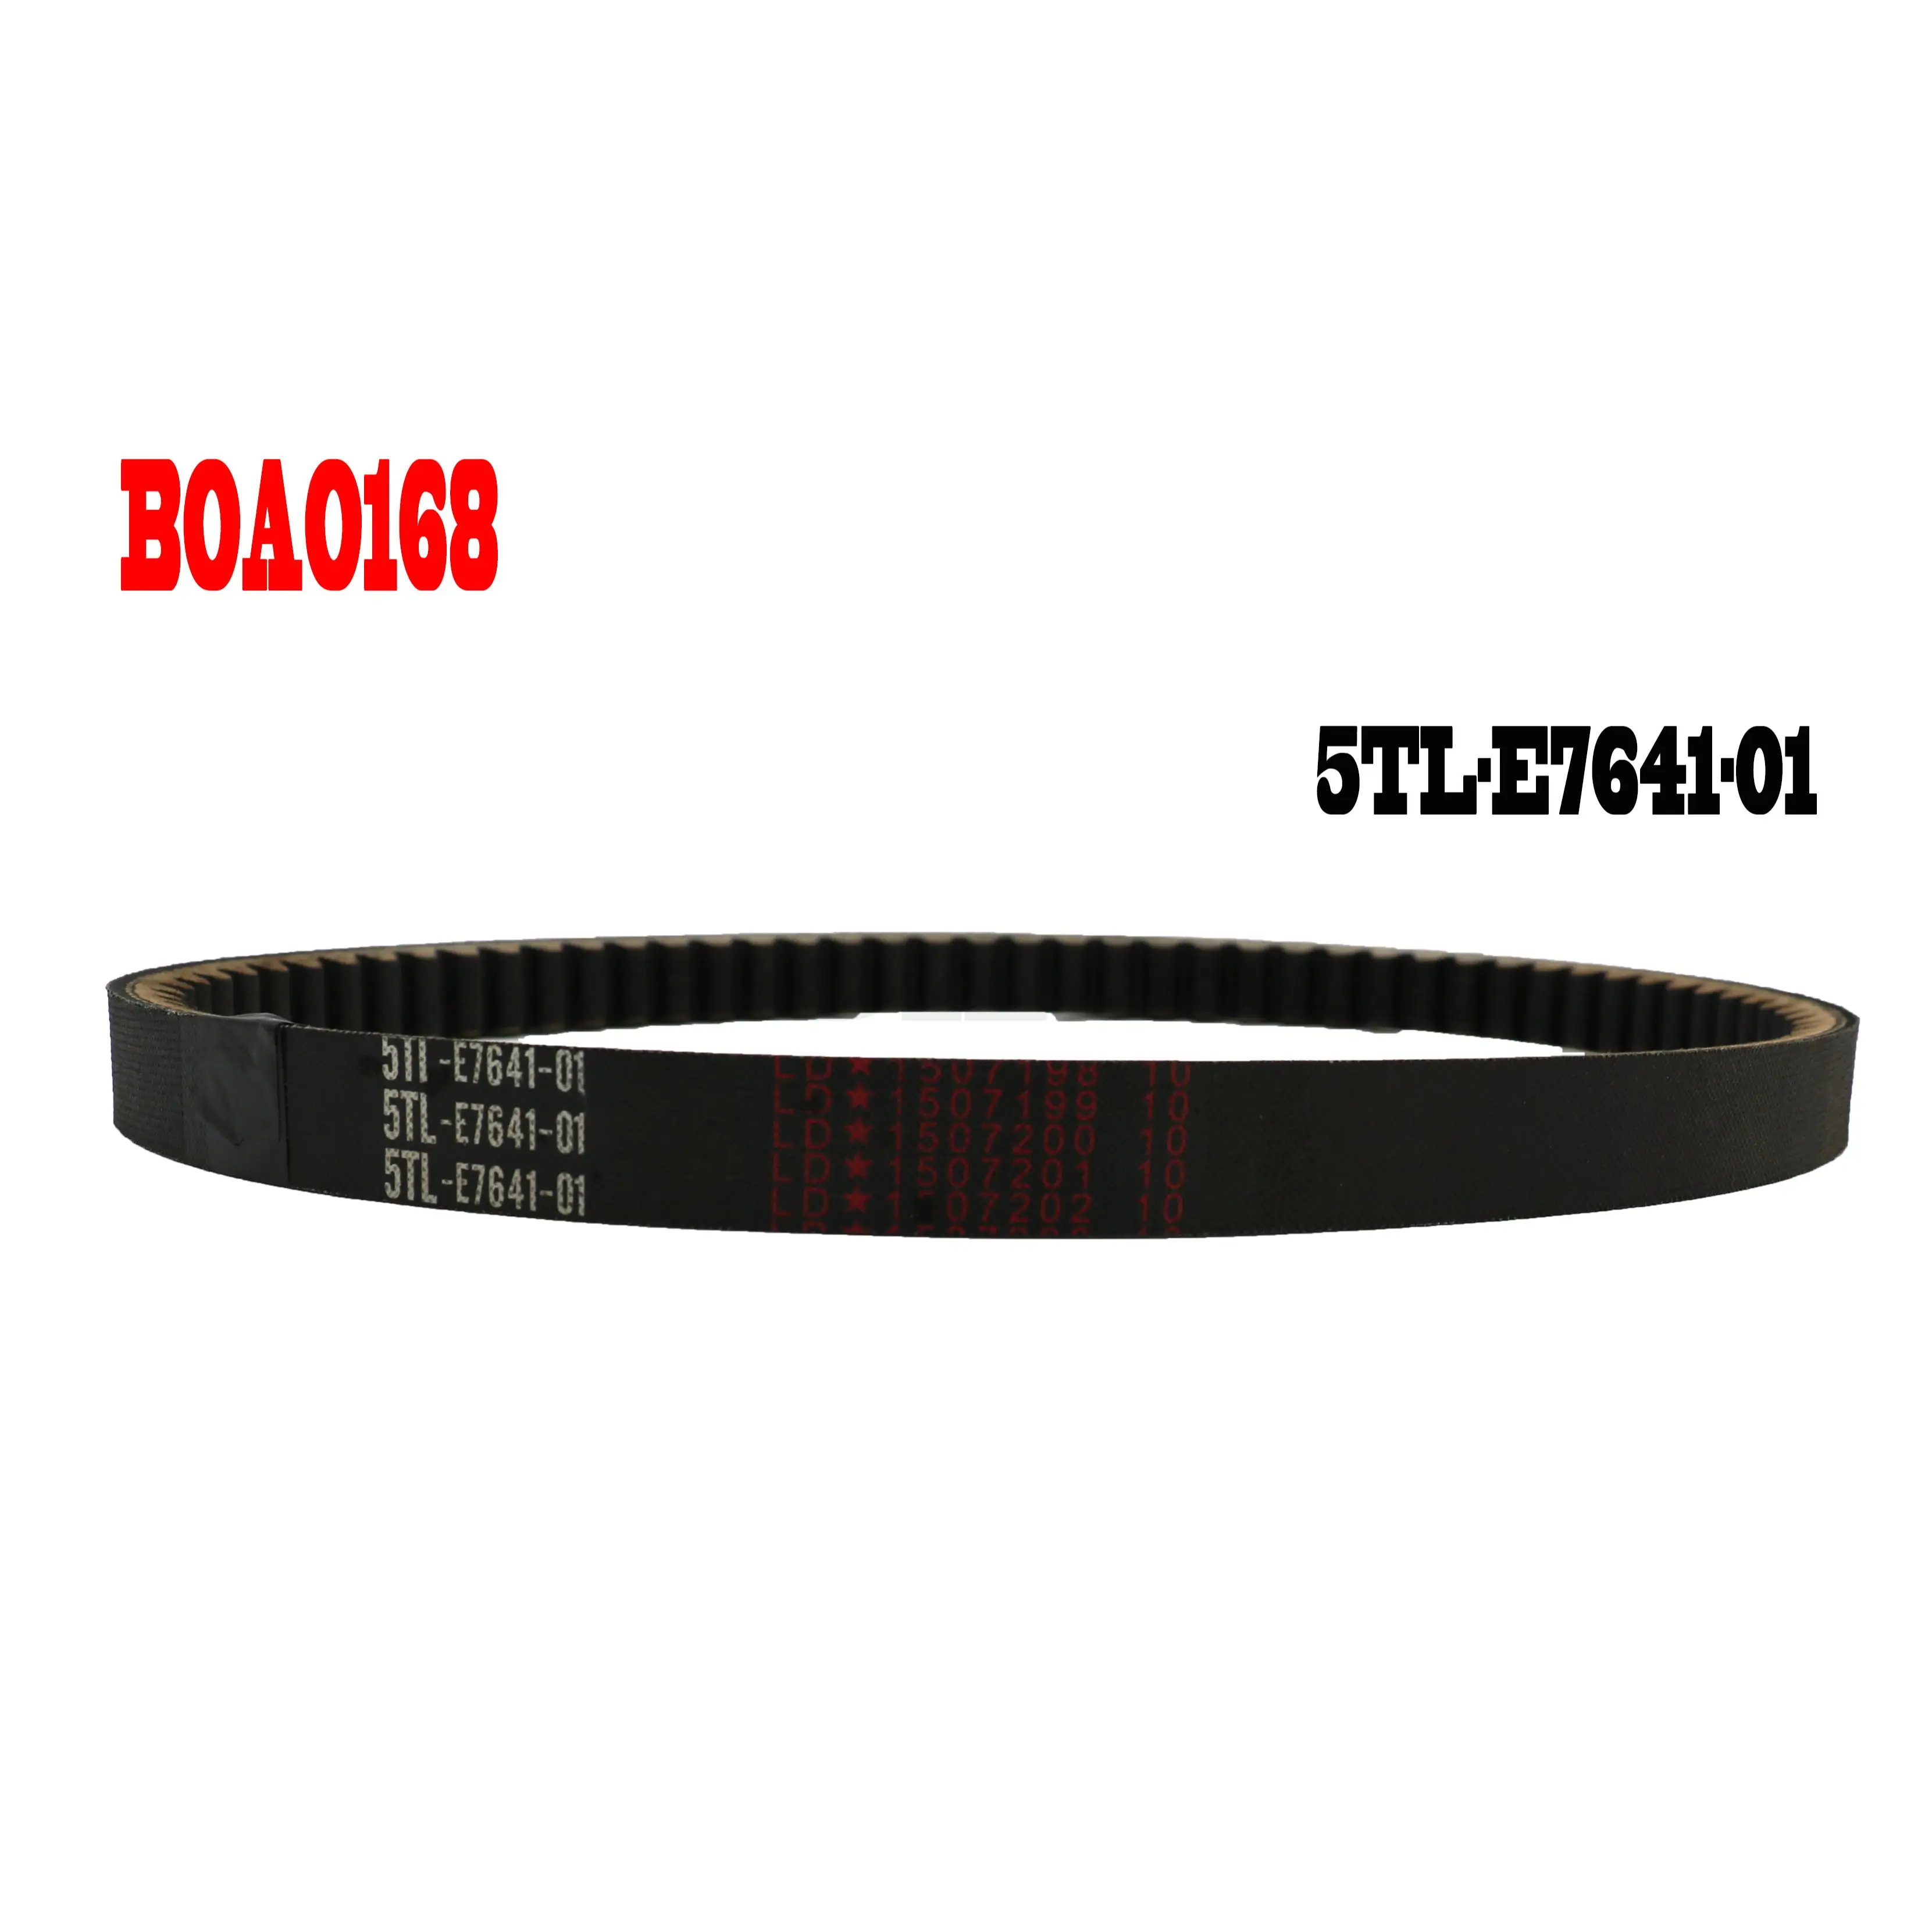 

5TL E7641 01 Motorcycle Scooter Moped High Quality Rubber Drive Belt for Mio115 Mio 110 sporty amore LT123 5TL E7641 01 Motor